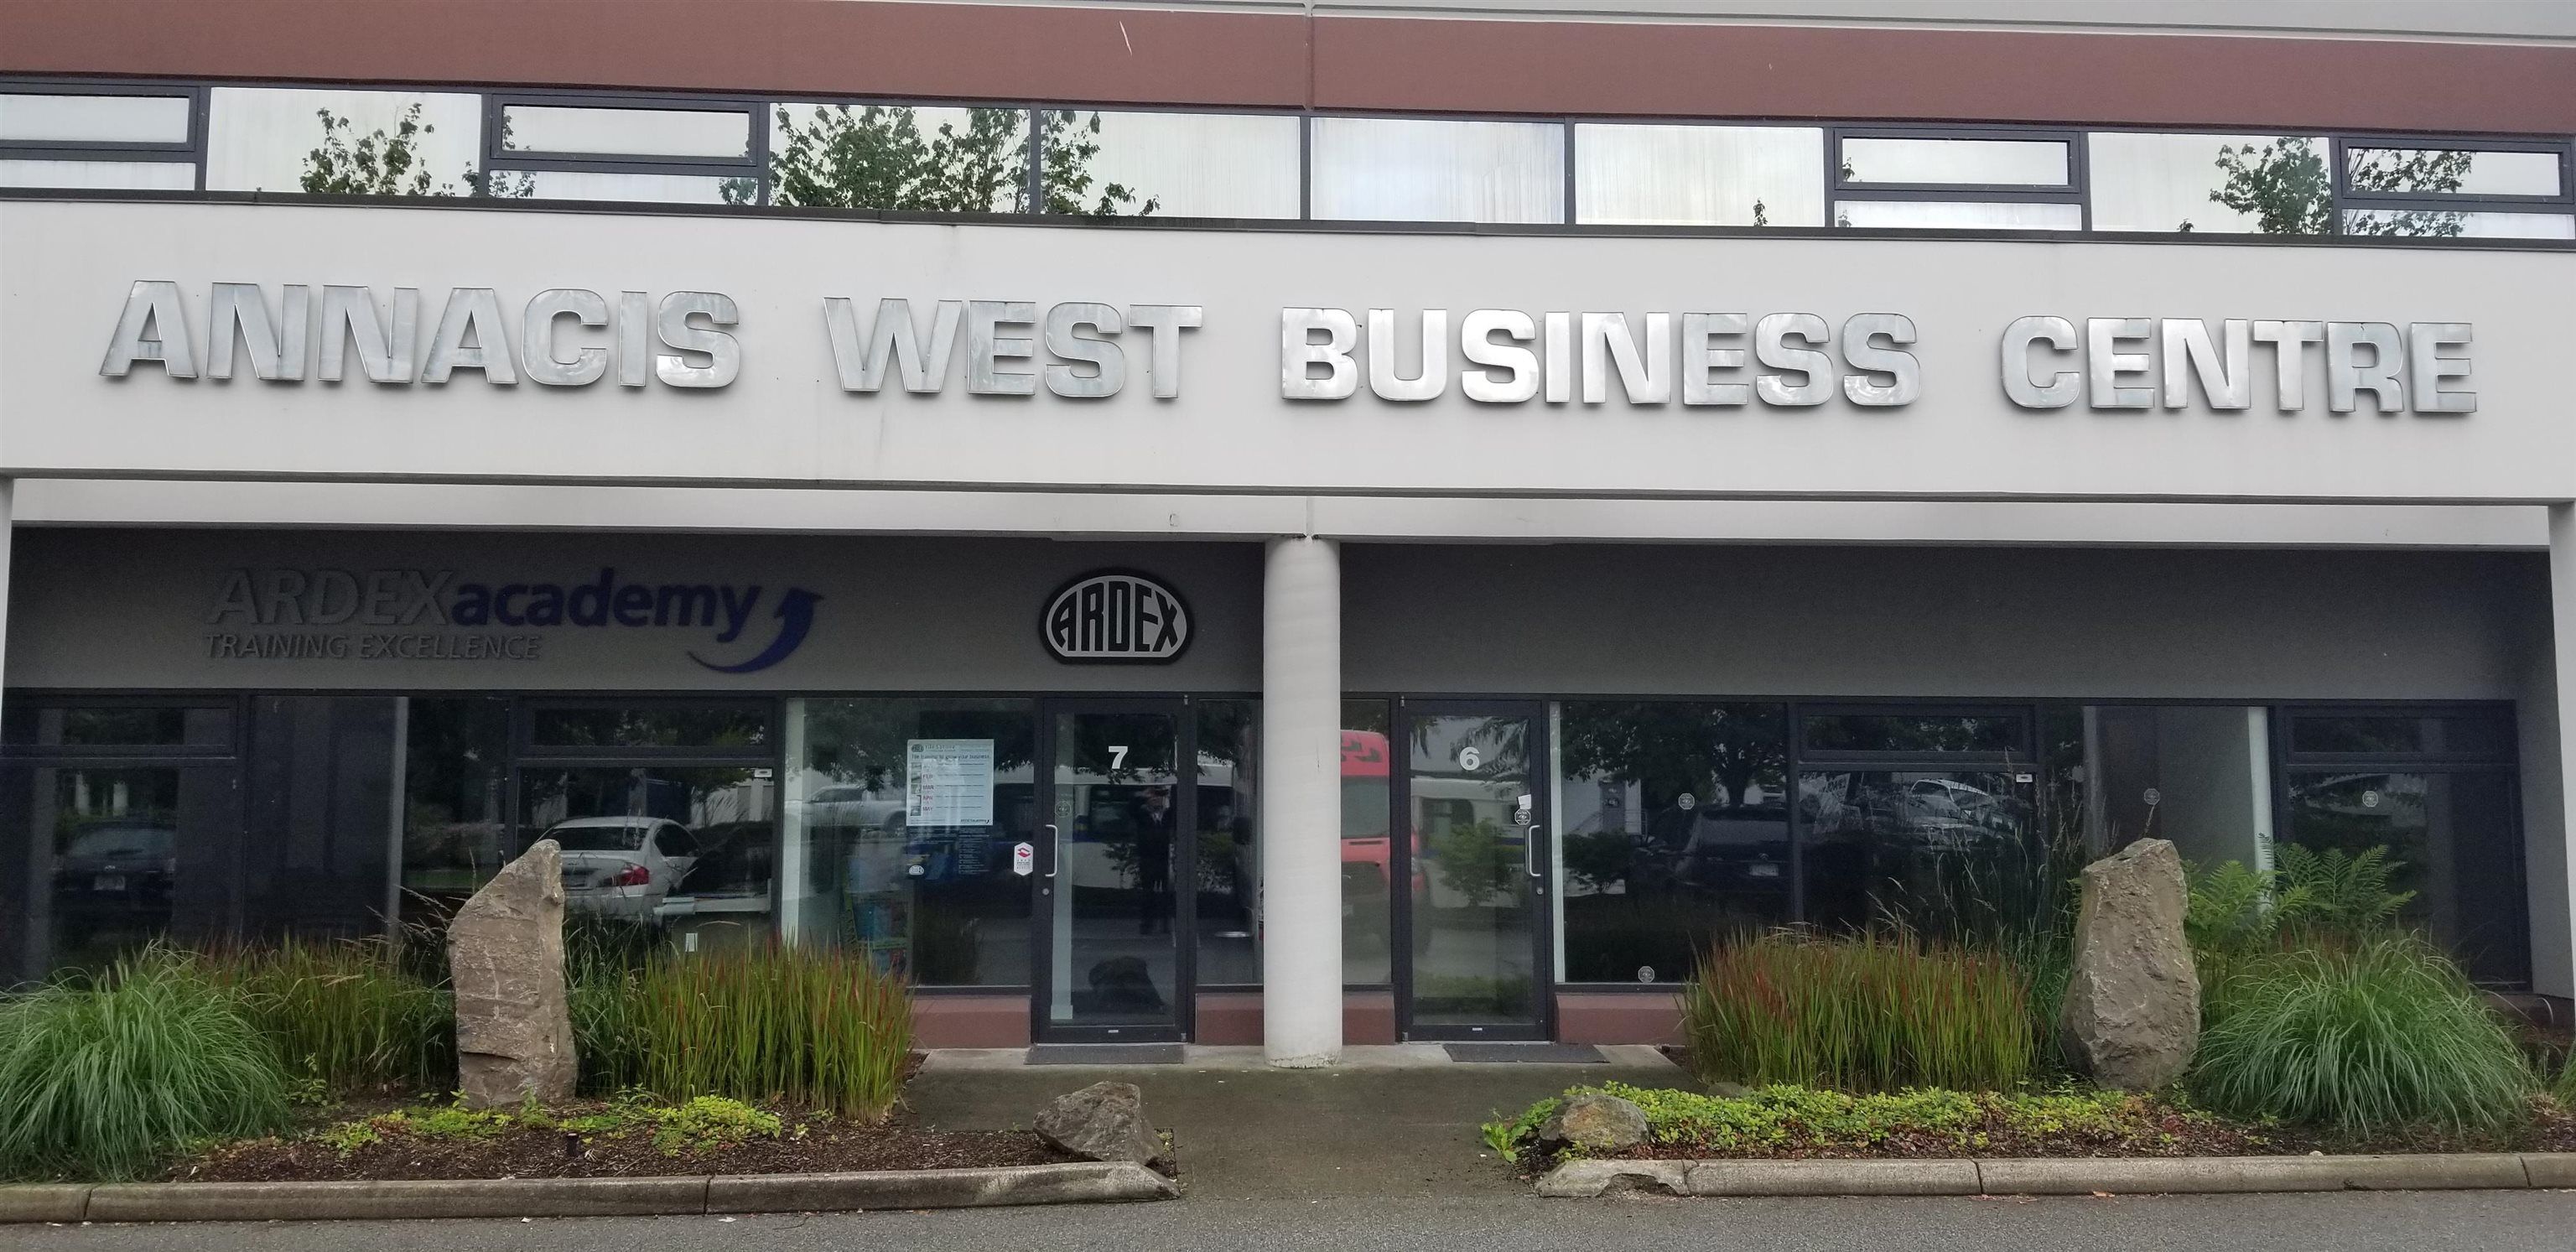 Main Photo: 9-10 1600 DERWENT in Ladner: Annacis Island Industrial for lease in "ANNACIS WEST BUSINESS CENTRE" : MLS®# C8056975